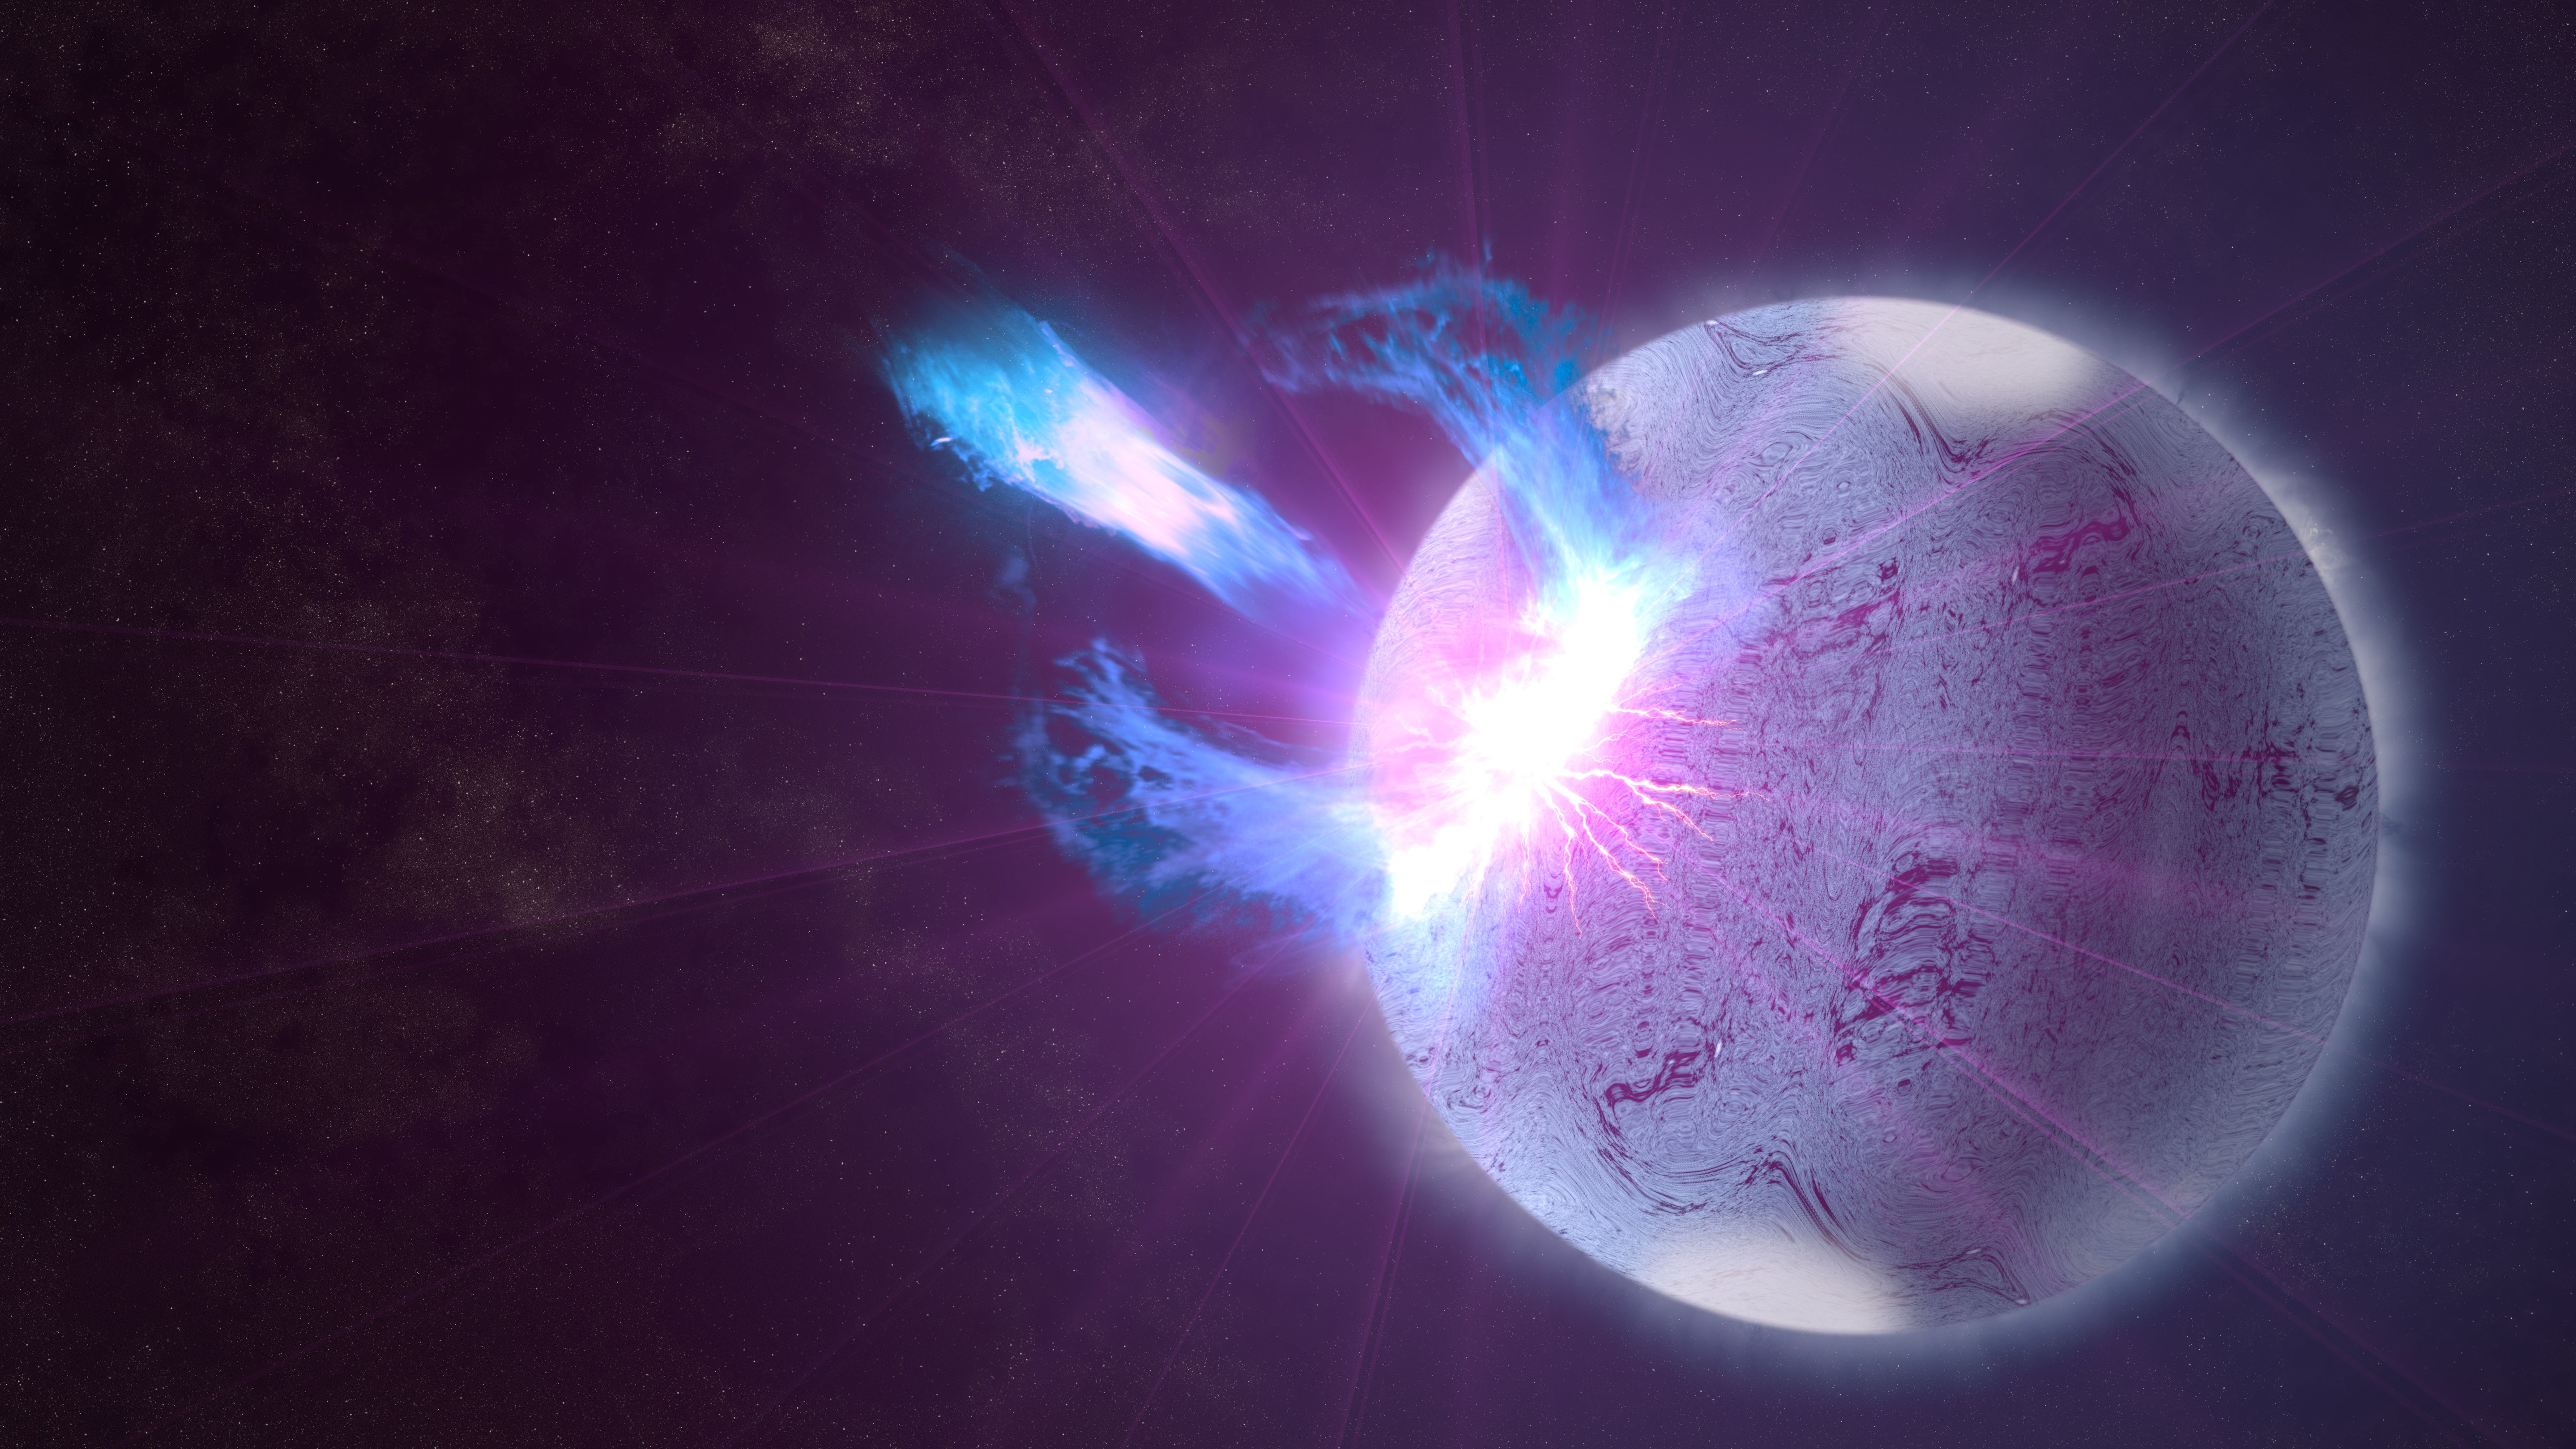 Starquake Hints in Magnetar 'Storm'